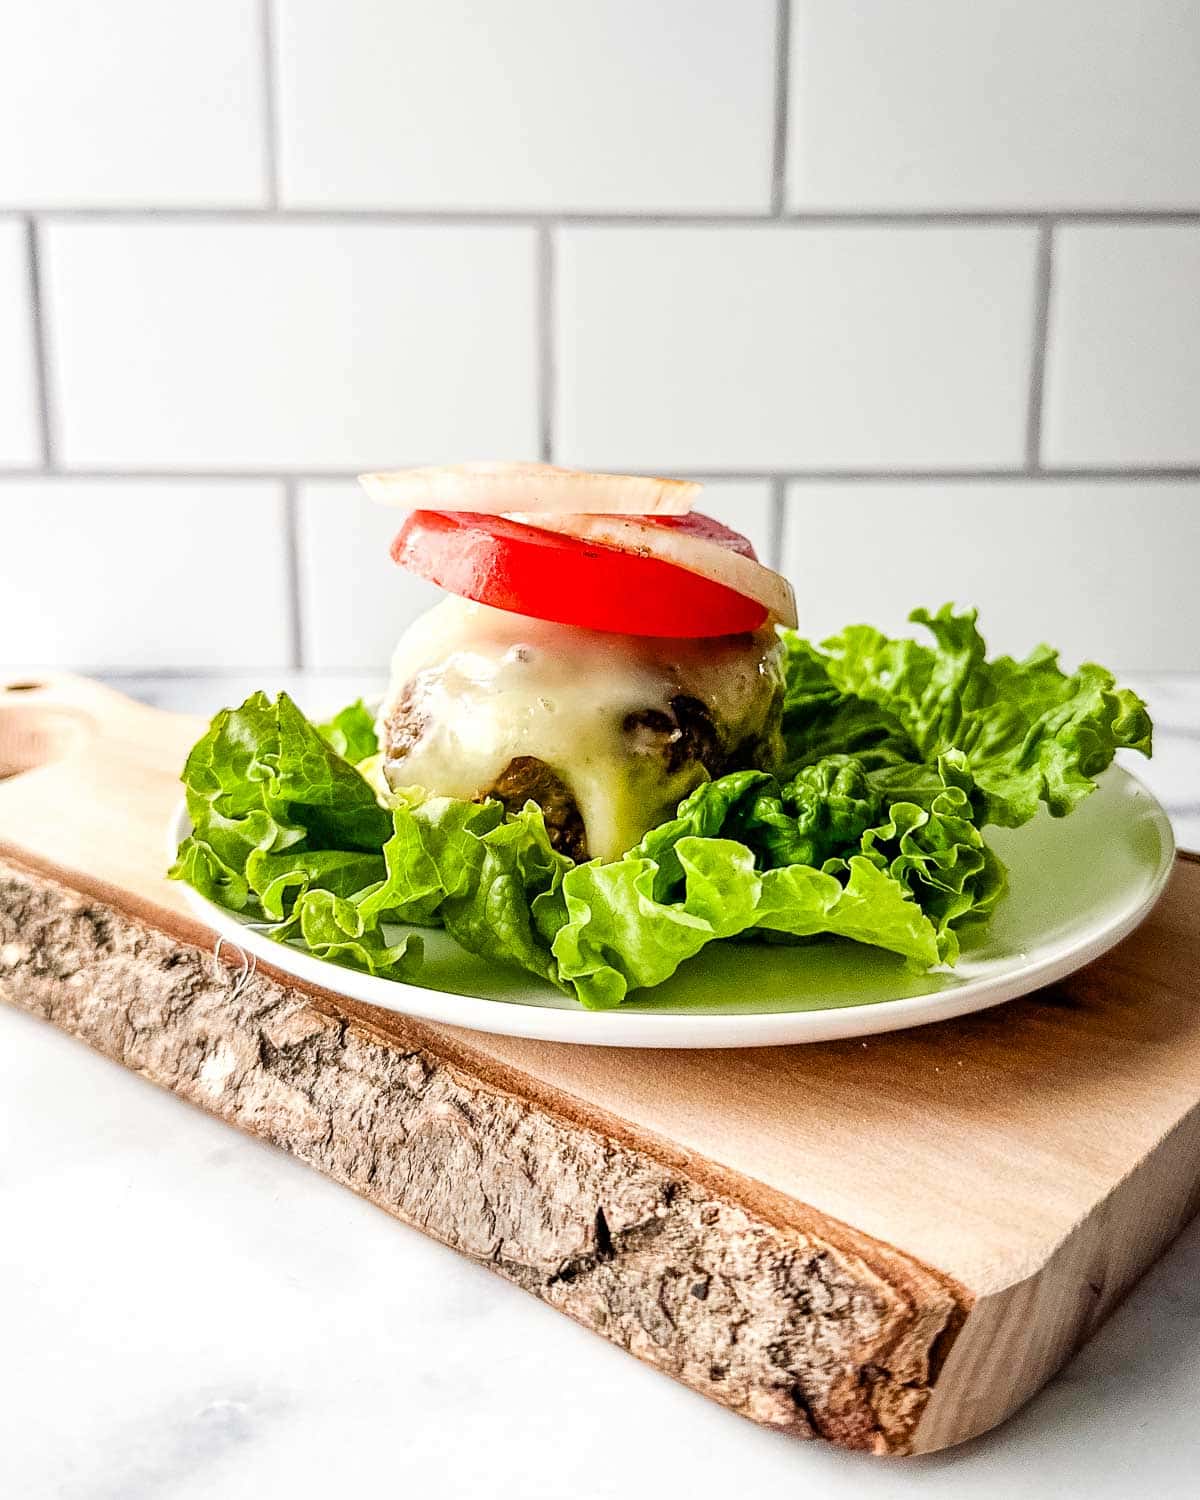 A turkey burger lettuce wrap with melted cheese, tomato and onion on a plate.